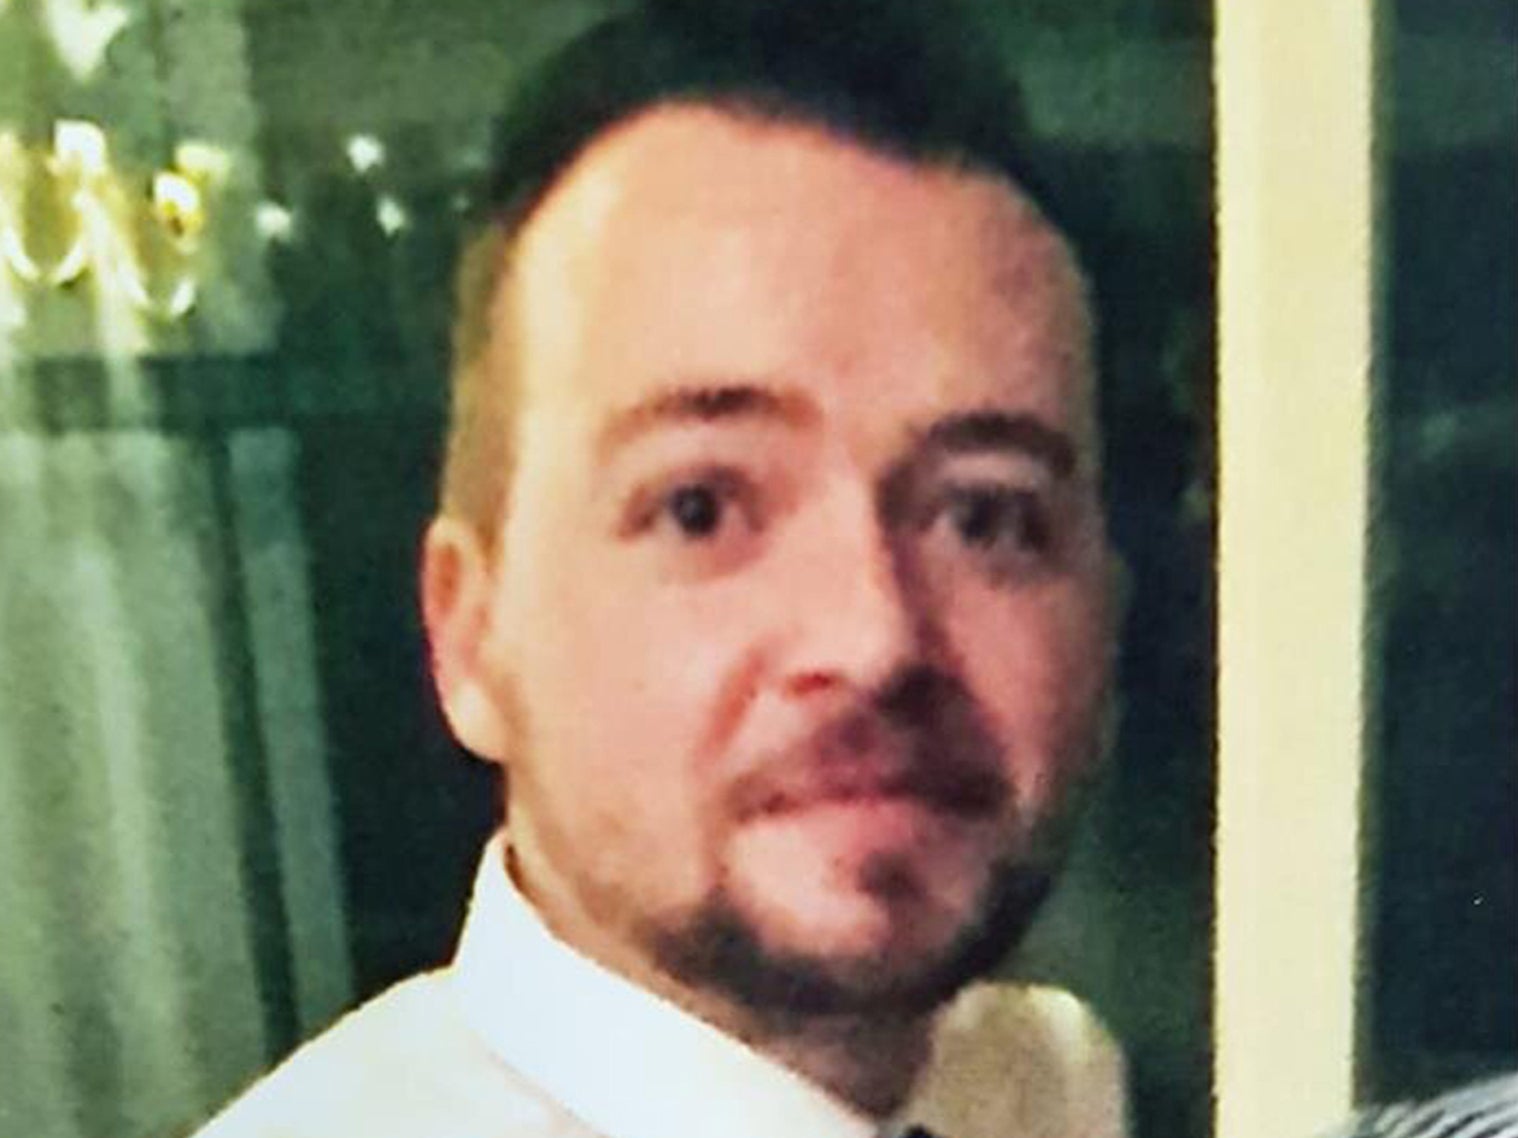 Edward Hinds, 37, was found with a suspected stab wound to the chest in a reservoir near Penzance, Cornwall